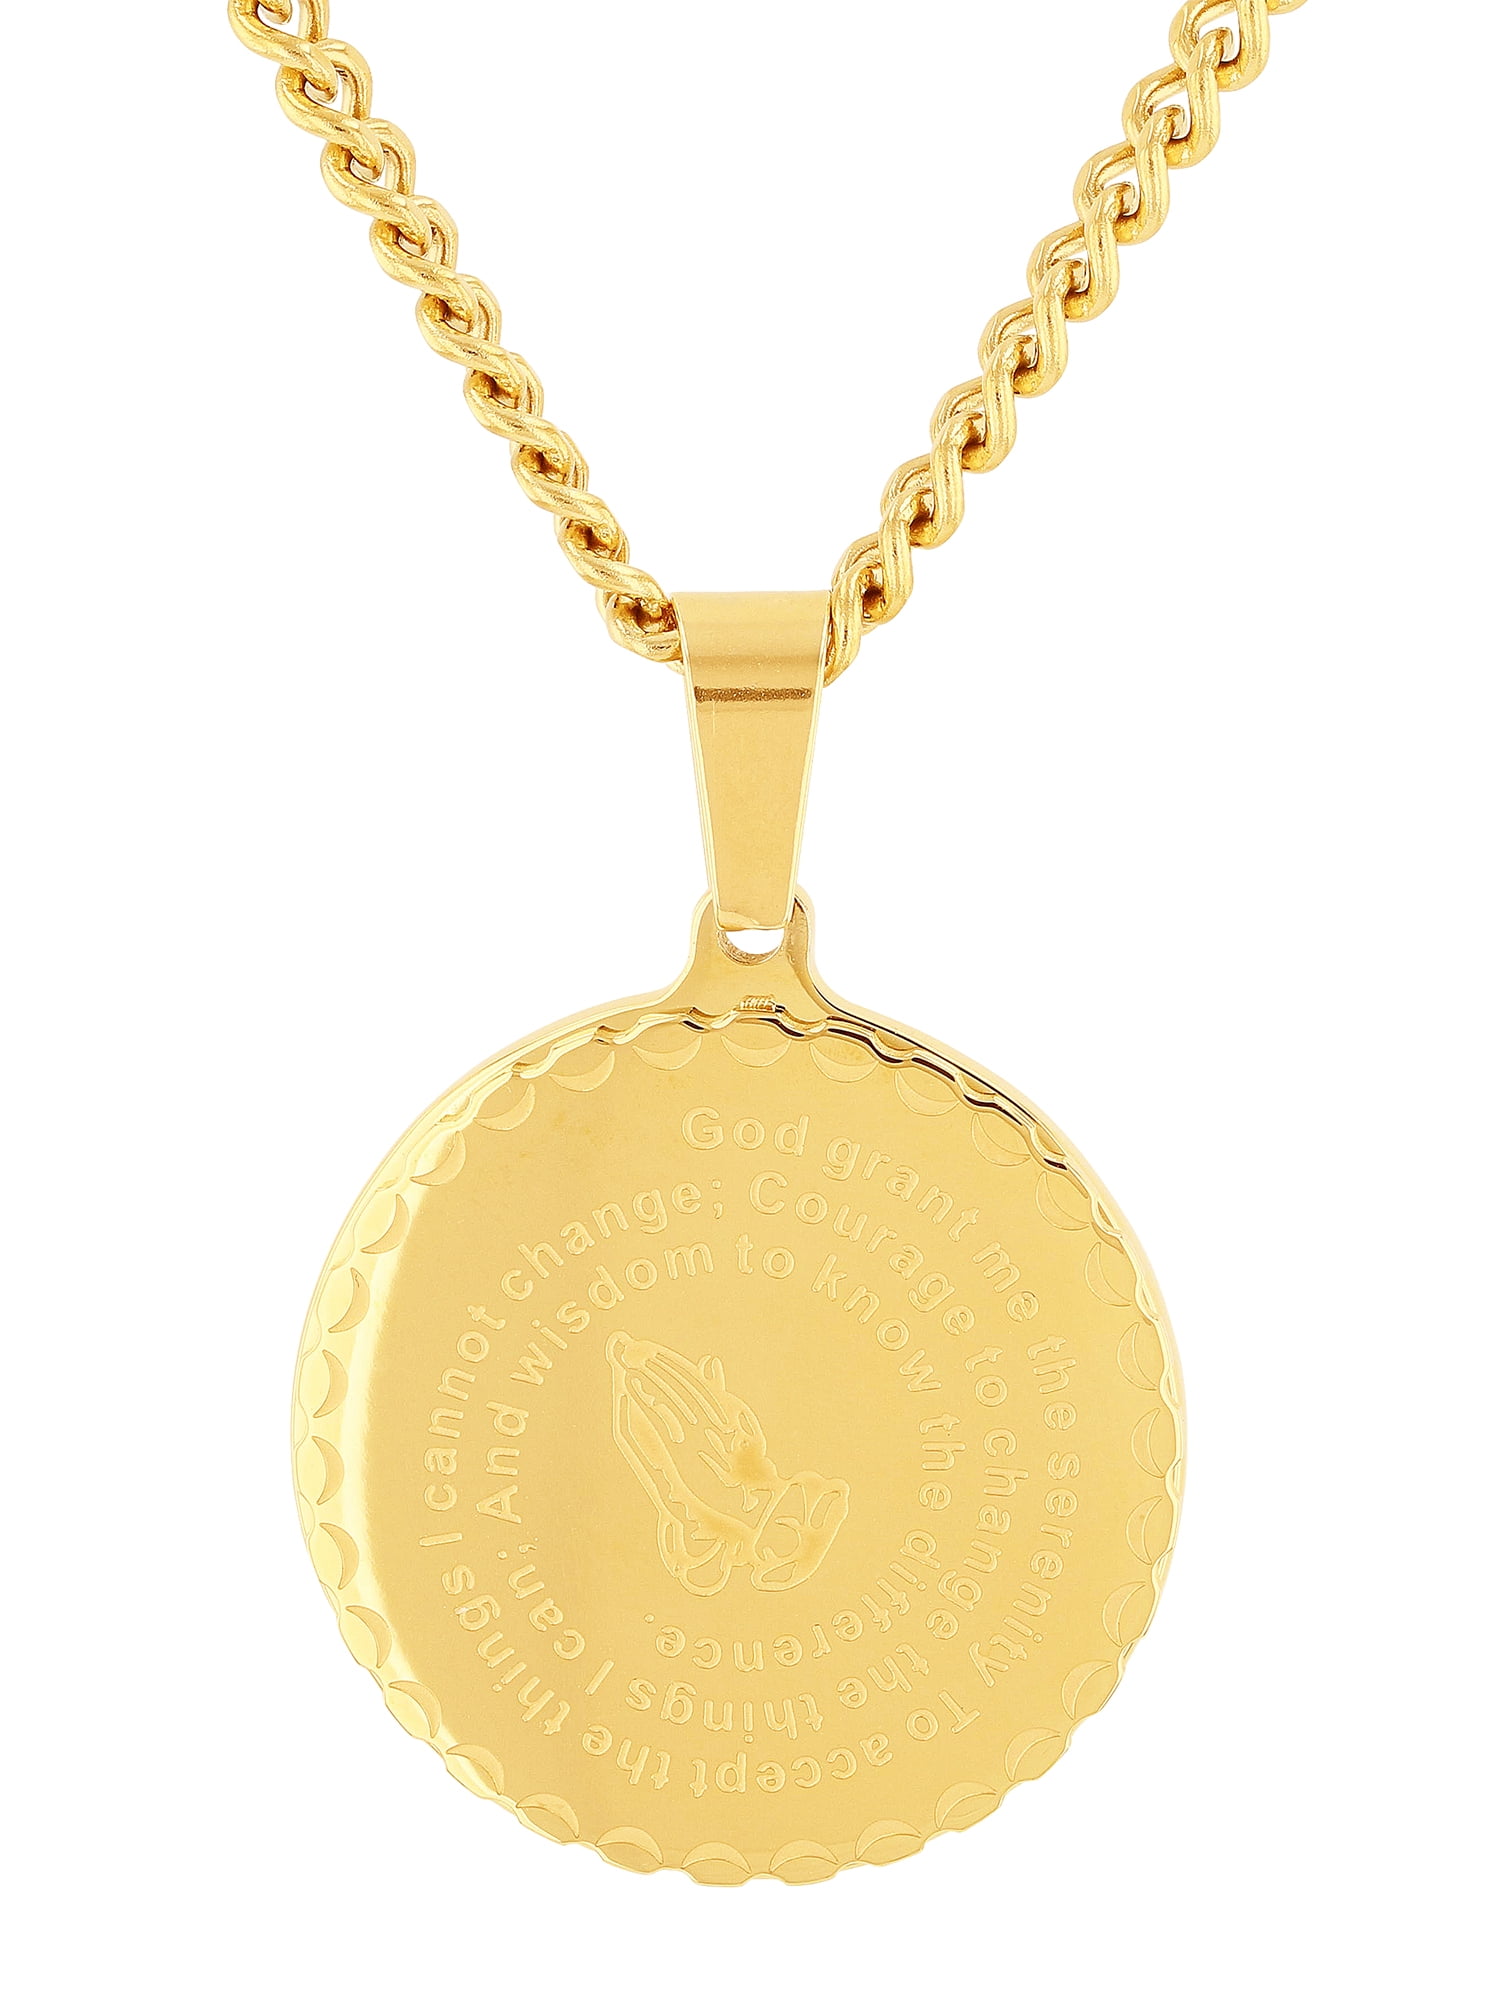 Gold-Tone Stainless Steel Serenity Prayer and The Lords Prayer Medallion Pendant Necklace